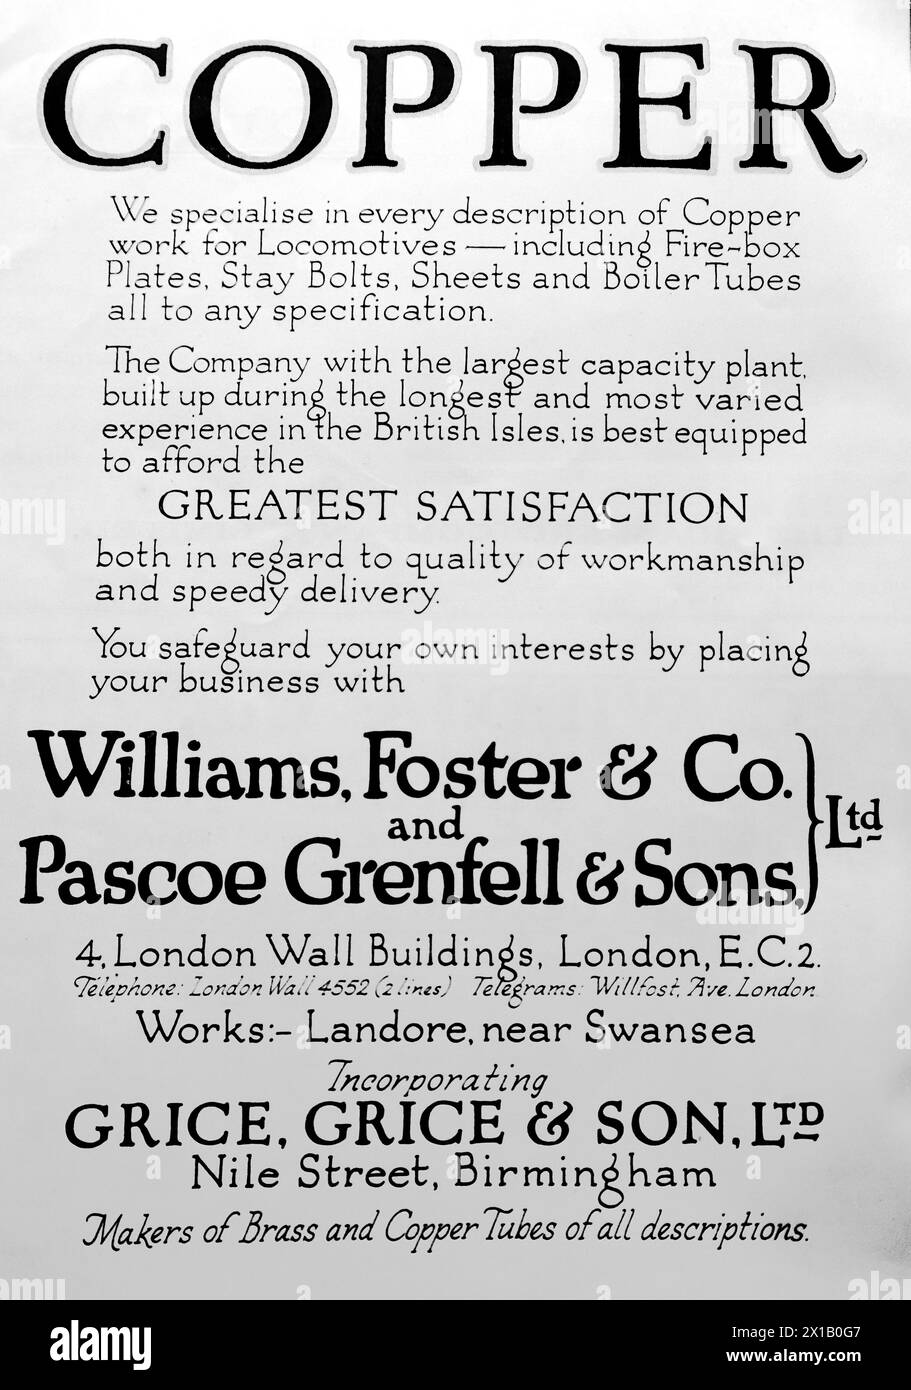 Advertisement for Williams, Foster and Co, and Pascoe Grenfell and Sons of London, with works in Landore, near Swindon and incorporating Grice Grice and Son Ltd, of Birmingham. Specialising in copper work for locomotives. From an original publication dated 15 May 1924, this helps to give an insight into public transport, and the railways in particular, of the 1920s. Stock Photo